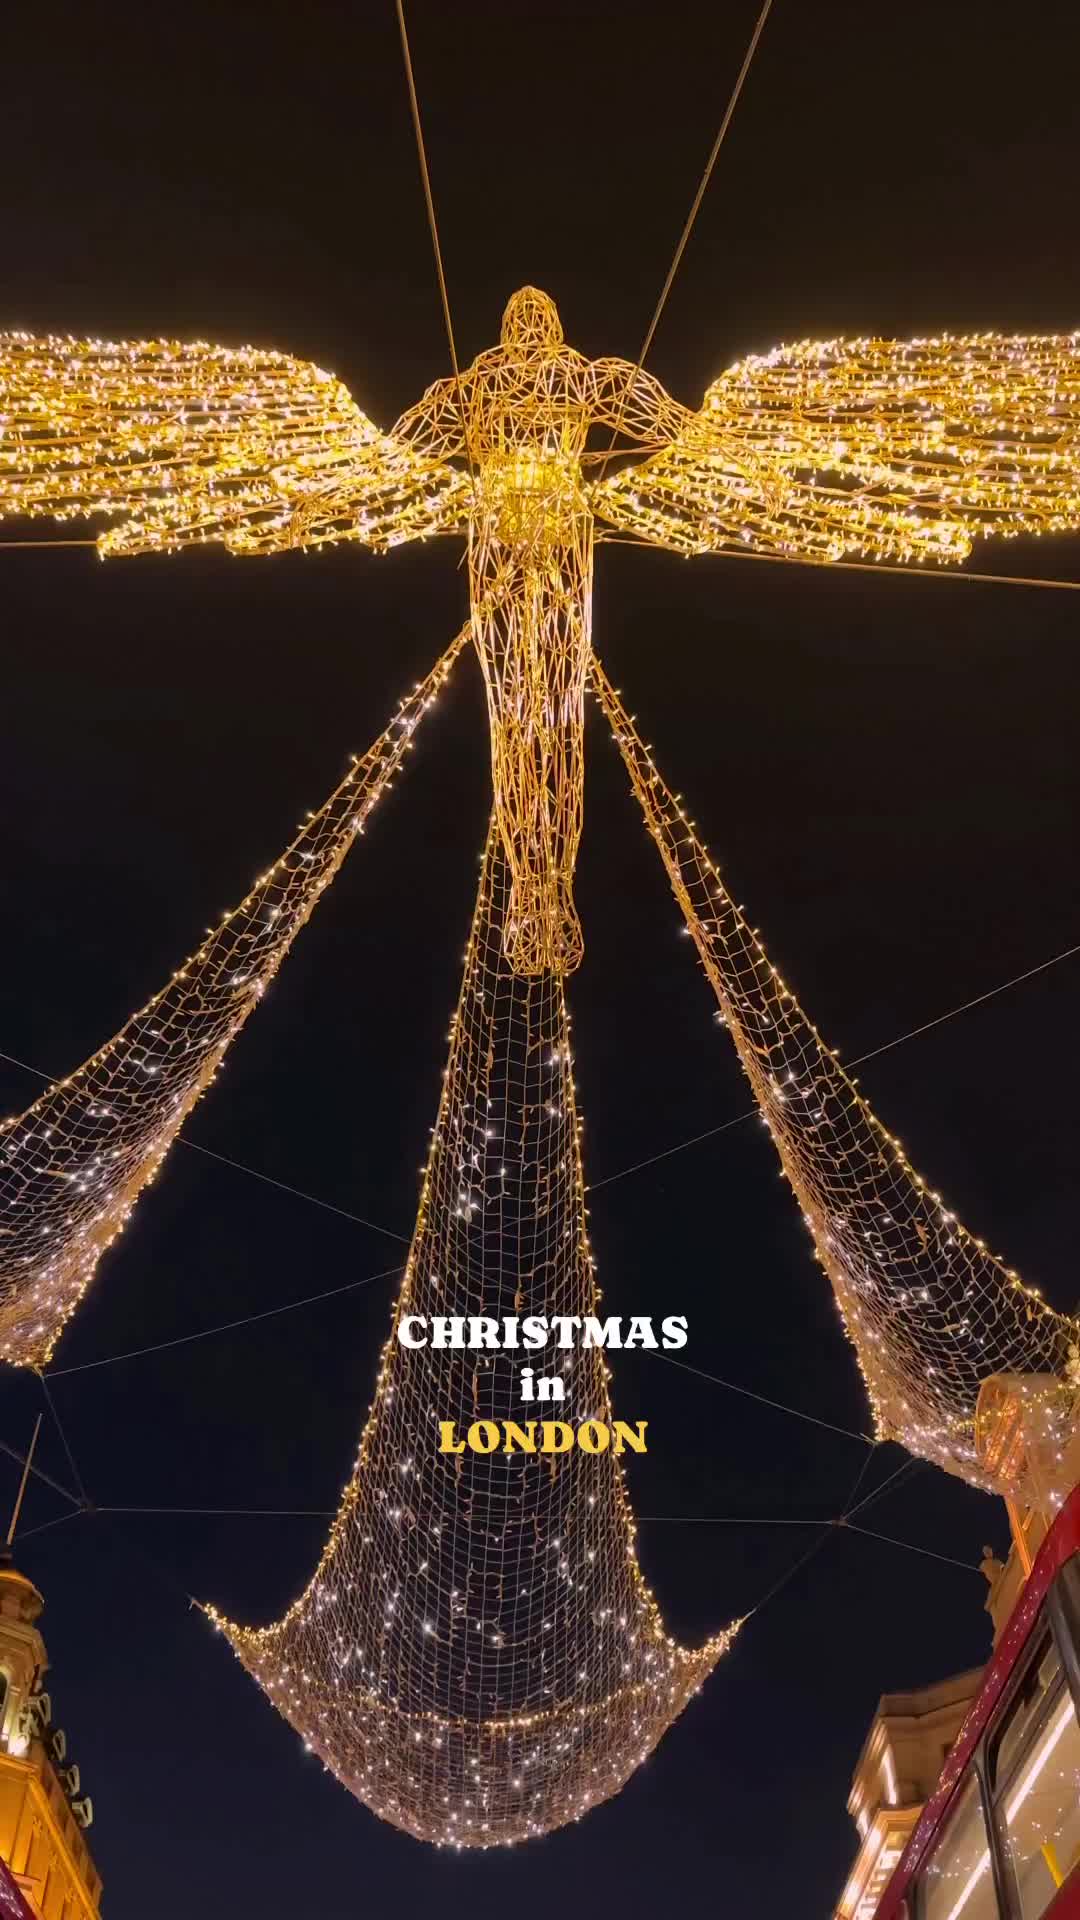 Christmas in London: A Magical Holiday Experience 🎄